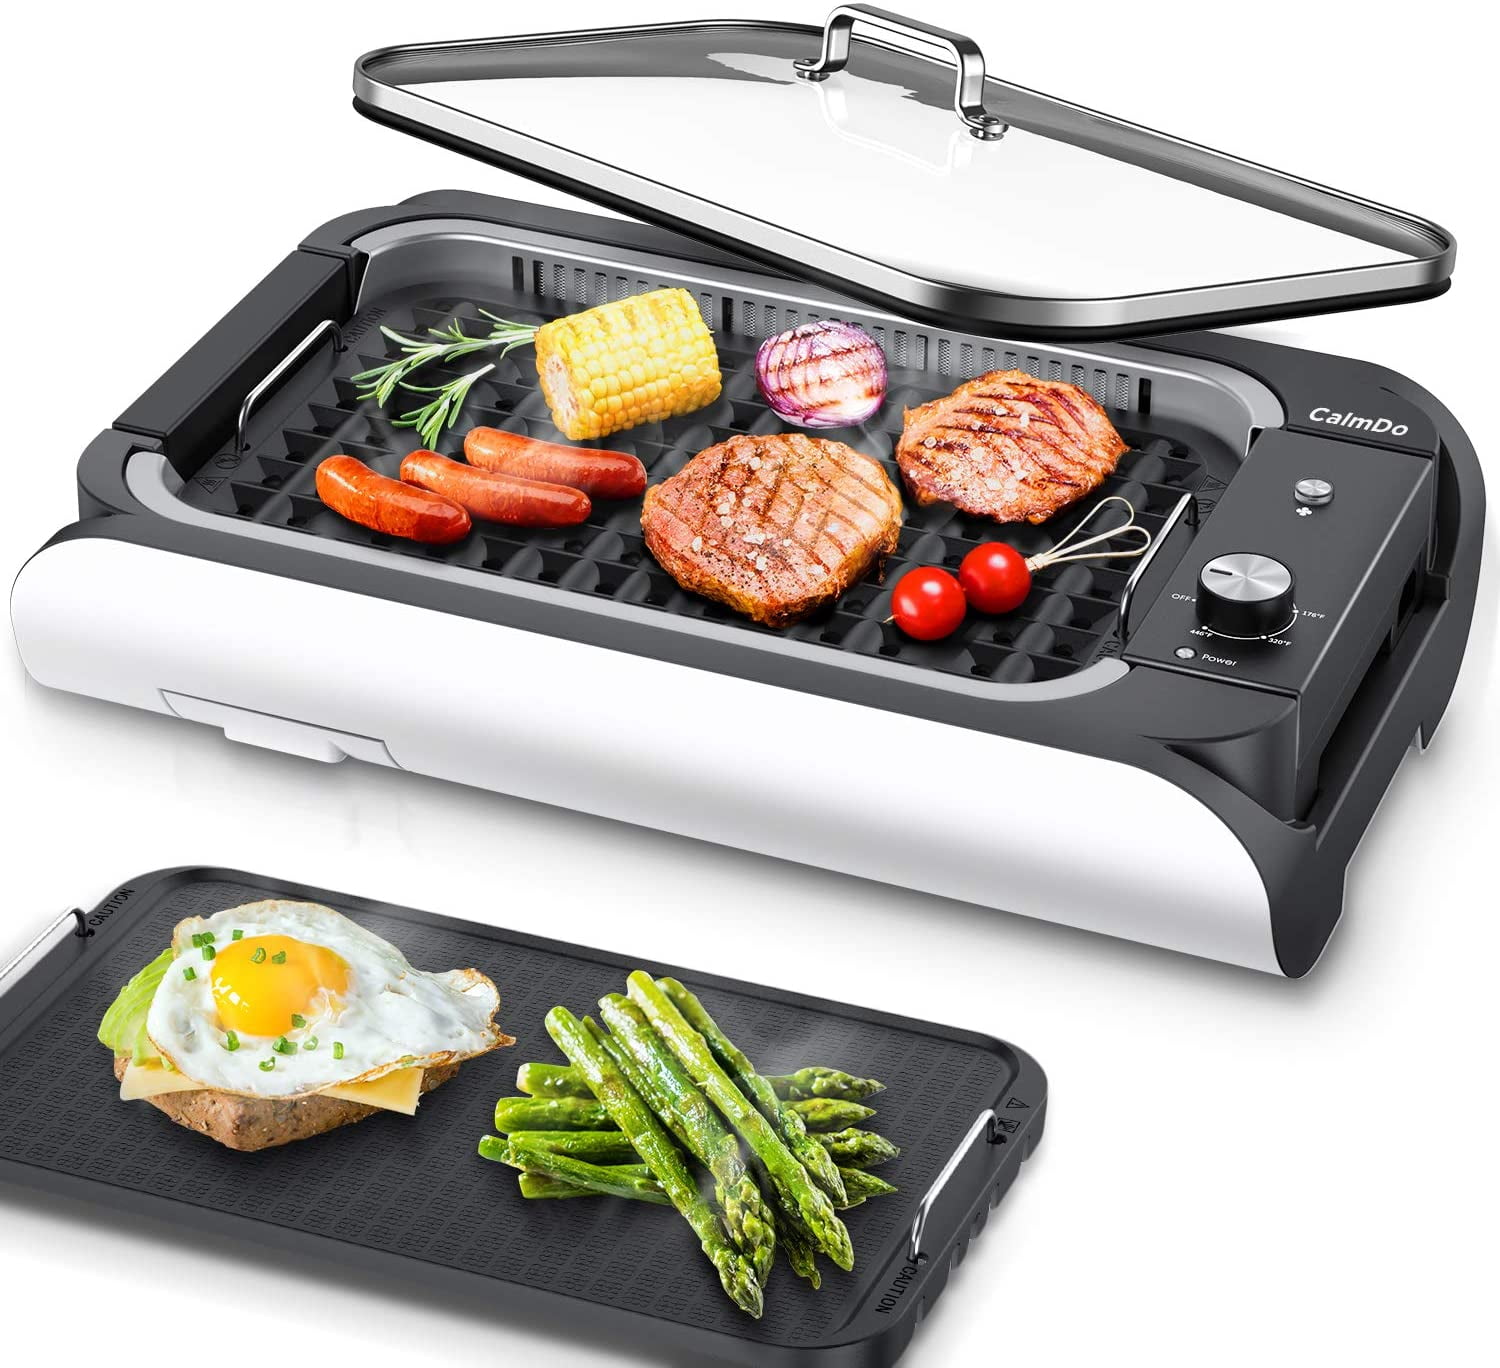 Black 14.5 x 9 Inch Surface Drip Tray 1400W Smokeless Grill Griddle Removable Non-Stick Disc Table Top Grill with Tempered Glass Lid Electric Grill